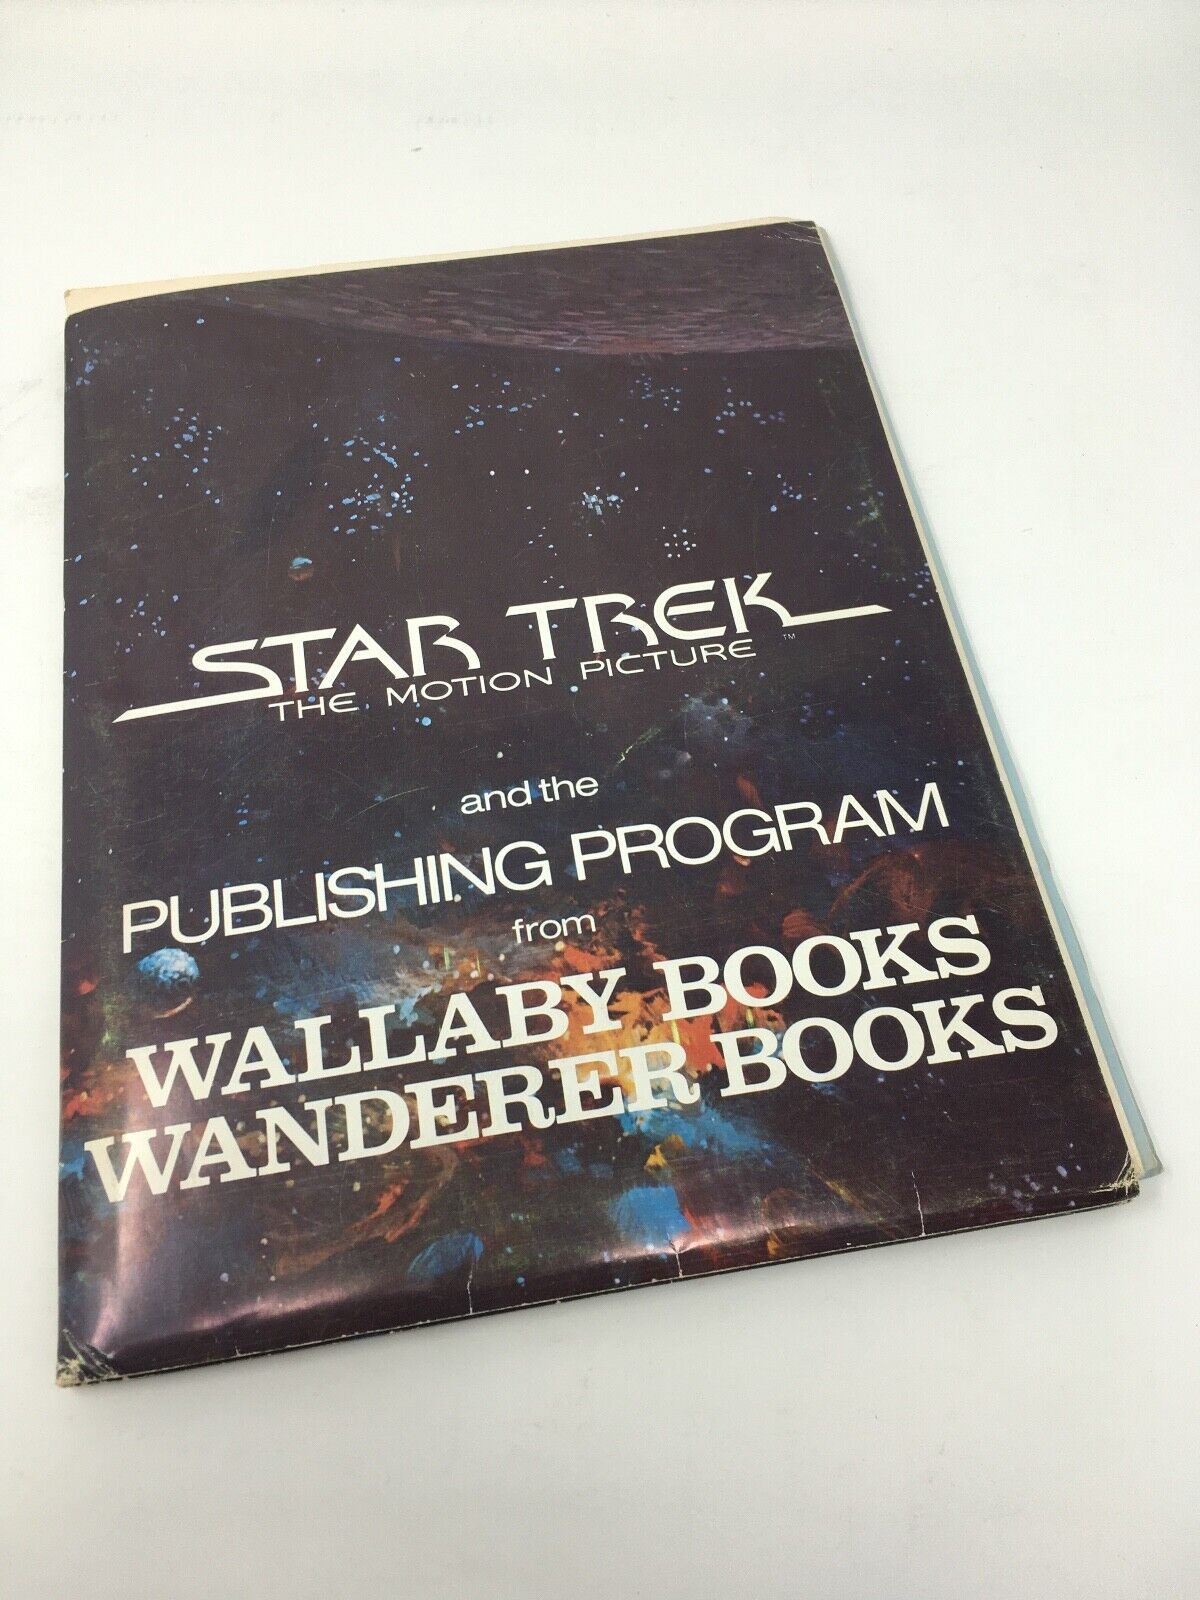 1979 STAR TREK THE Complete Free Shipping MOTION PICTURE Credence pho Program Publishing folder